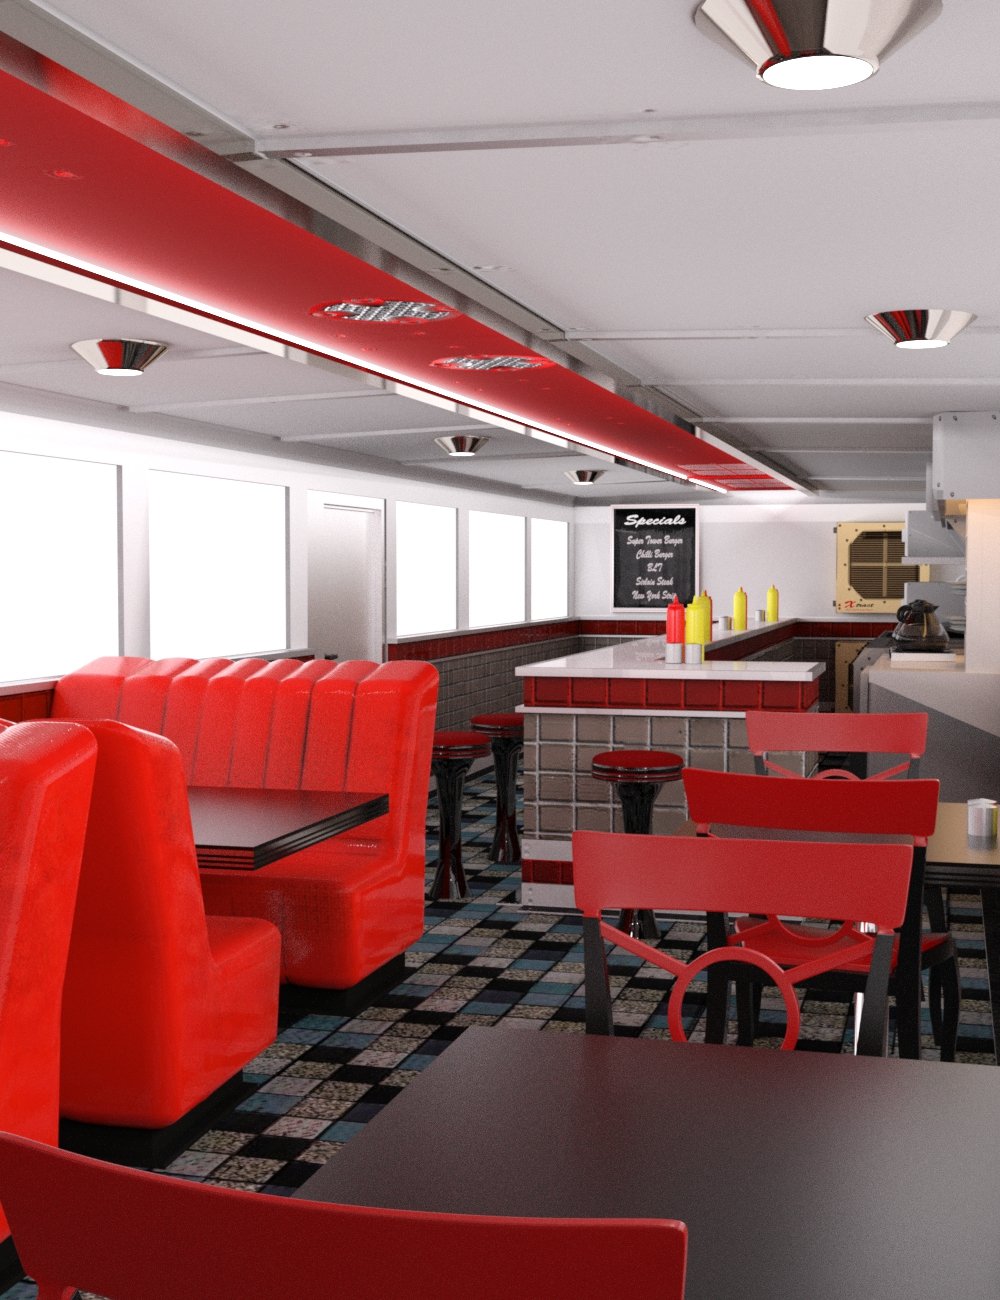 Jay's Diner by: Serum, 3D Models by Daz 3D